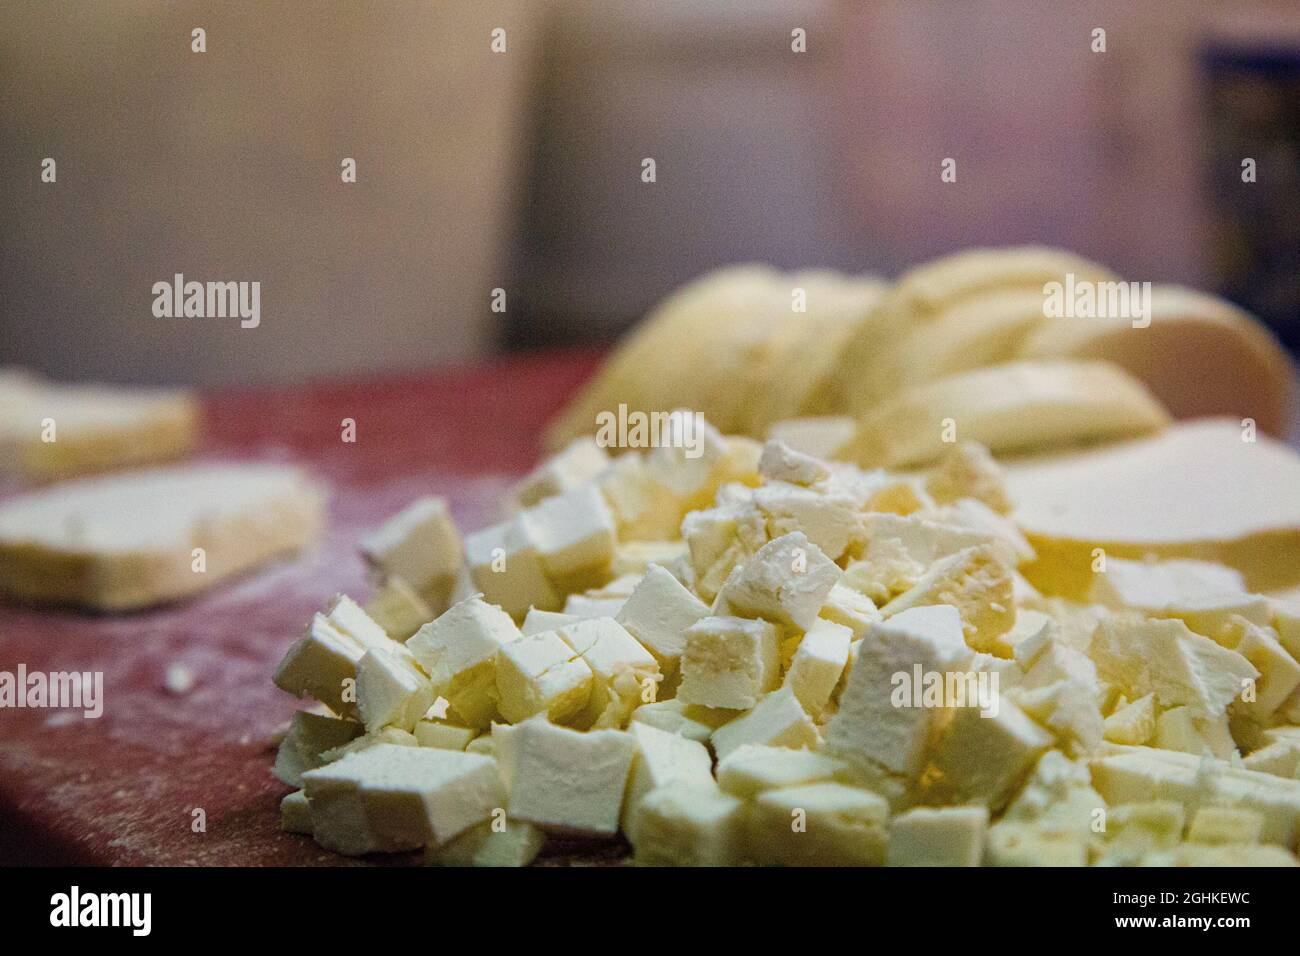 Close-up view of cut mascarpone cheese tacos Stock Photo